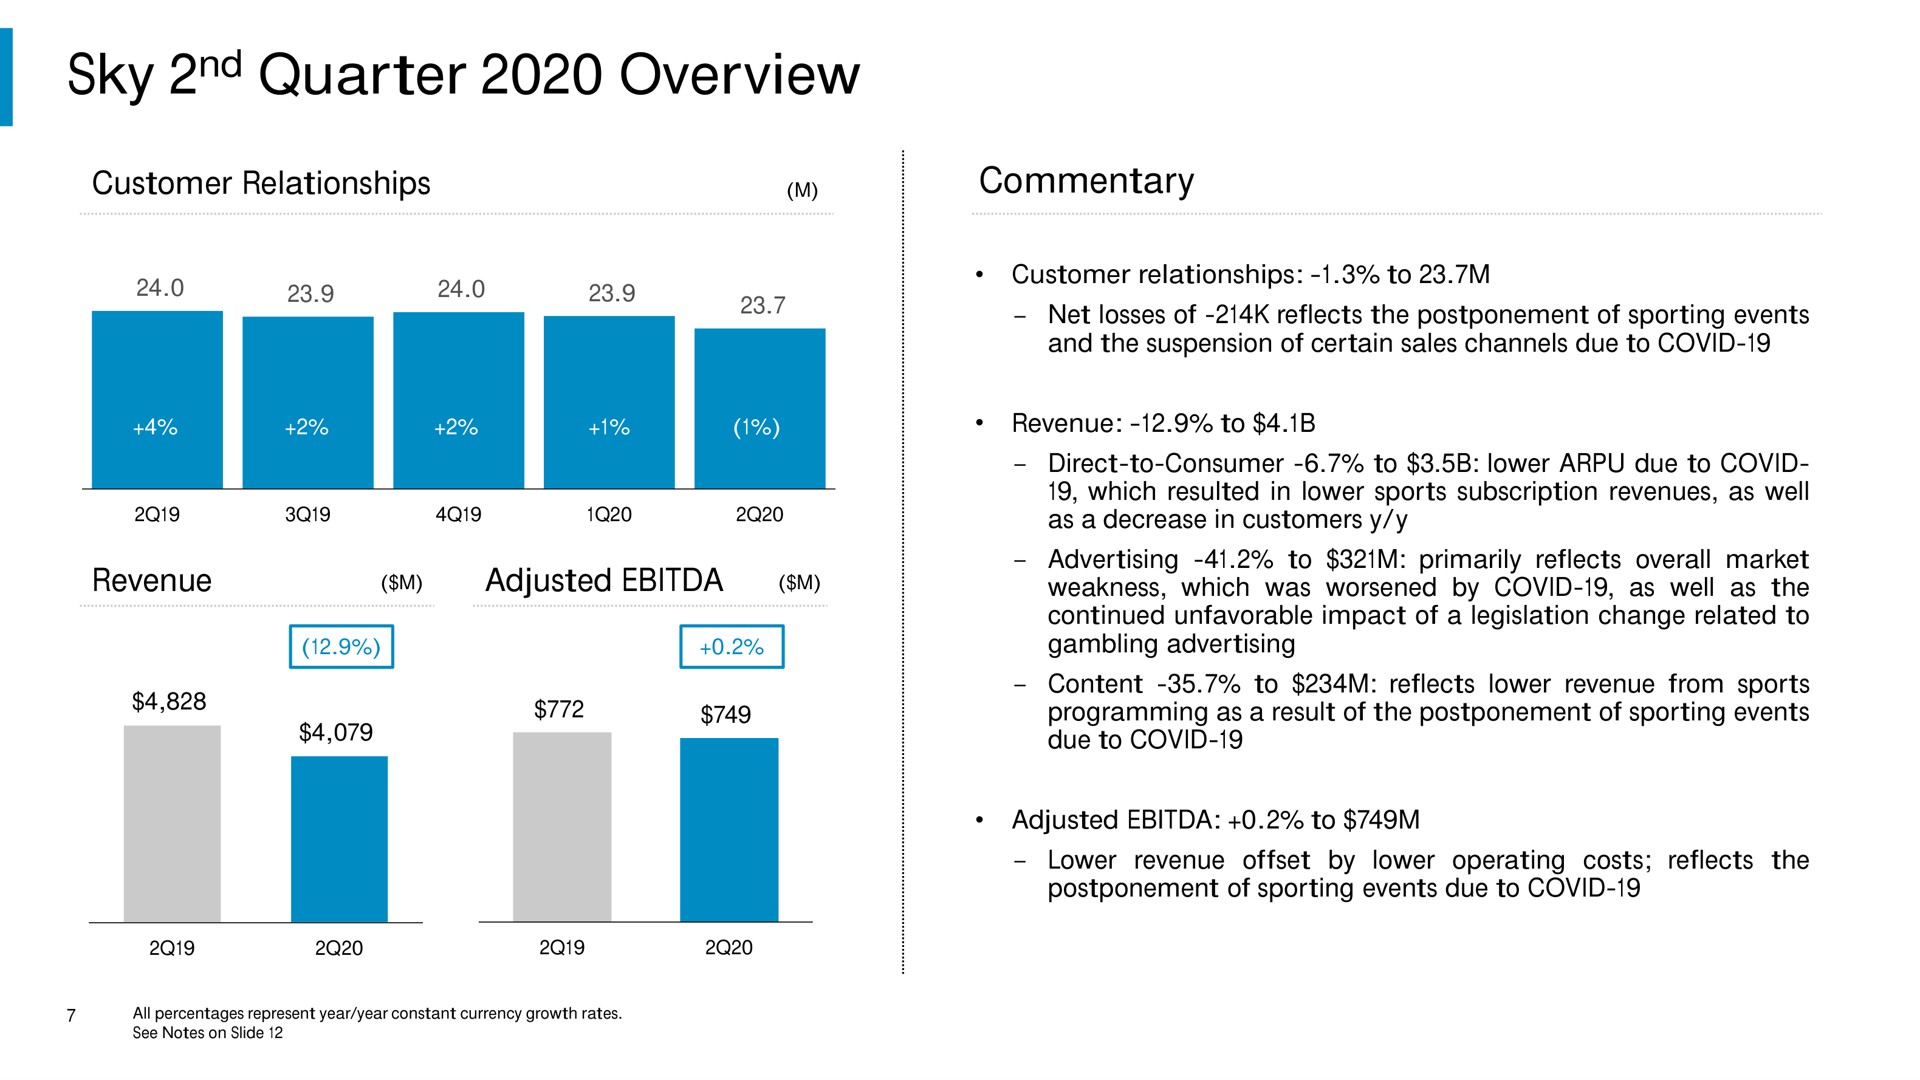 sky quarter overview customer rel commentary revenue adjusted as a decrease in customers as the weakness which was worsened by covid as well content to reflects lower revenue from sports due to covid | Comcast